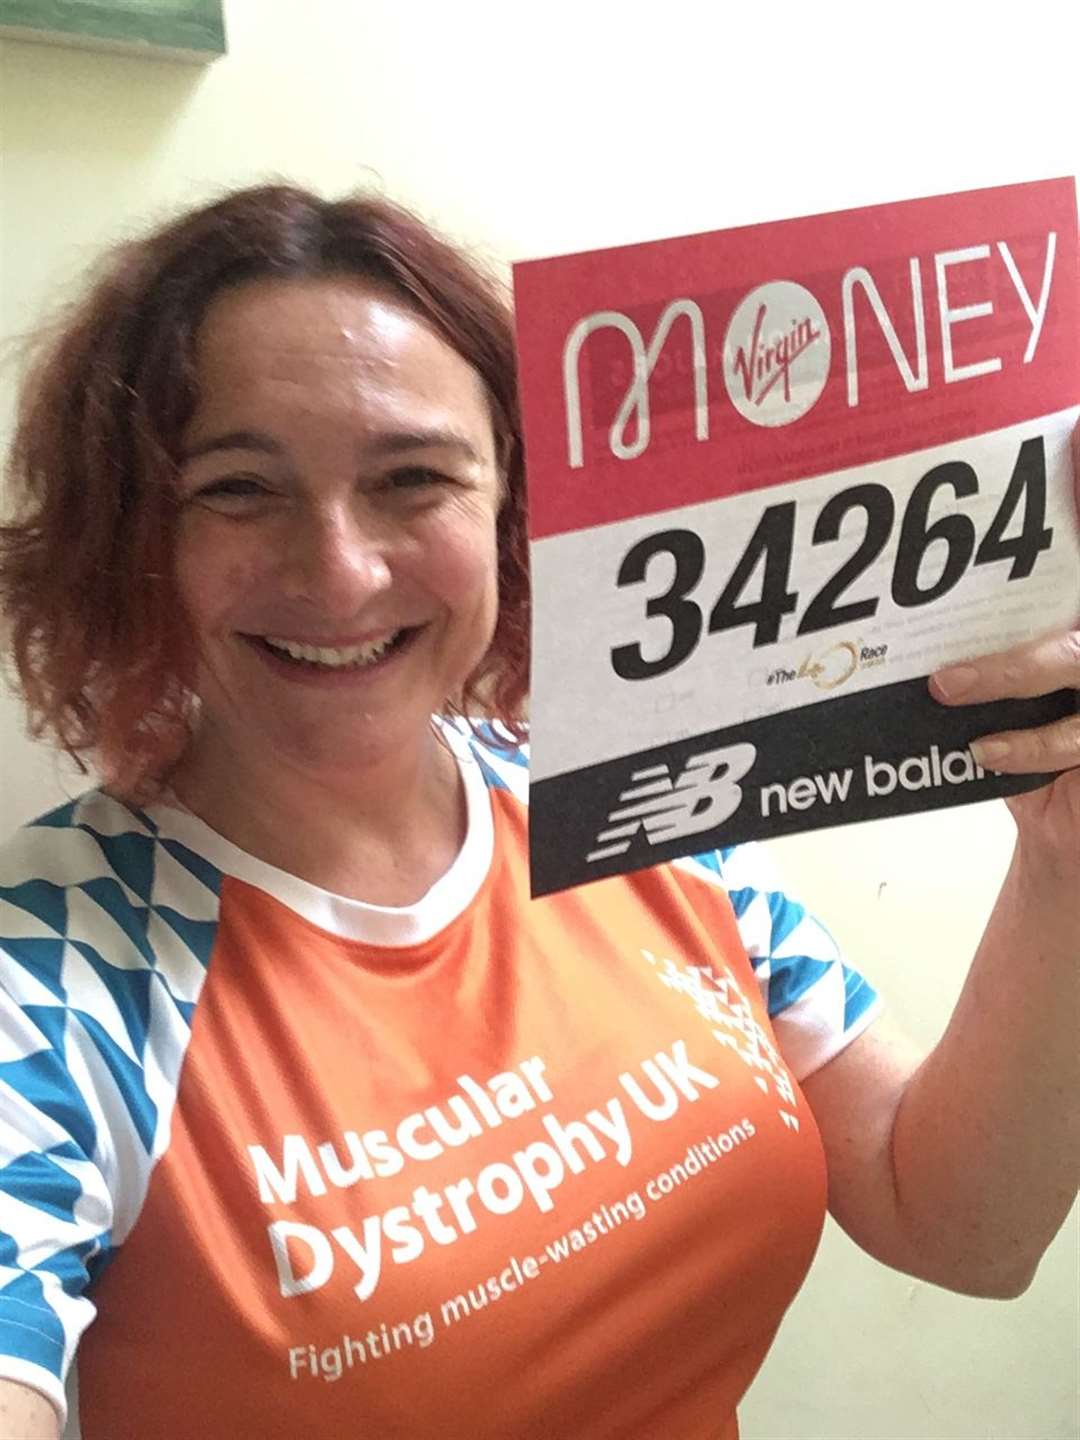 Catherine Woodhead, chief executive of Muscular Dystrophy UK, who completed the 2020 Virgin Money London Marathon from Chelmsford to raise money for the charity (Muscular Dystrophy UK/PA)